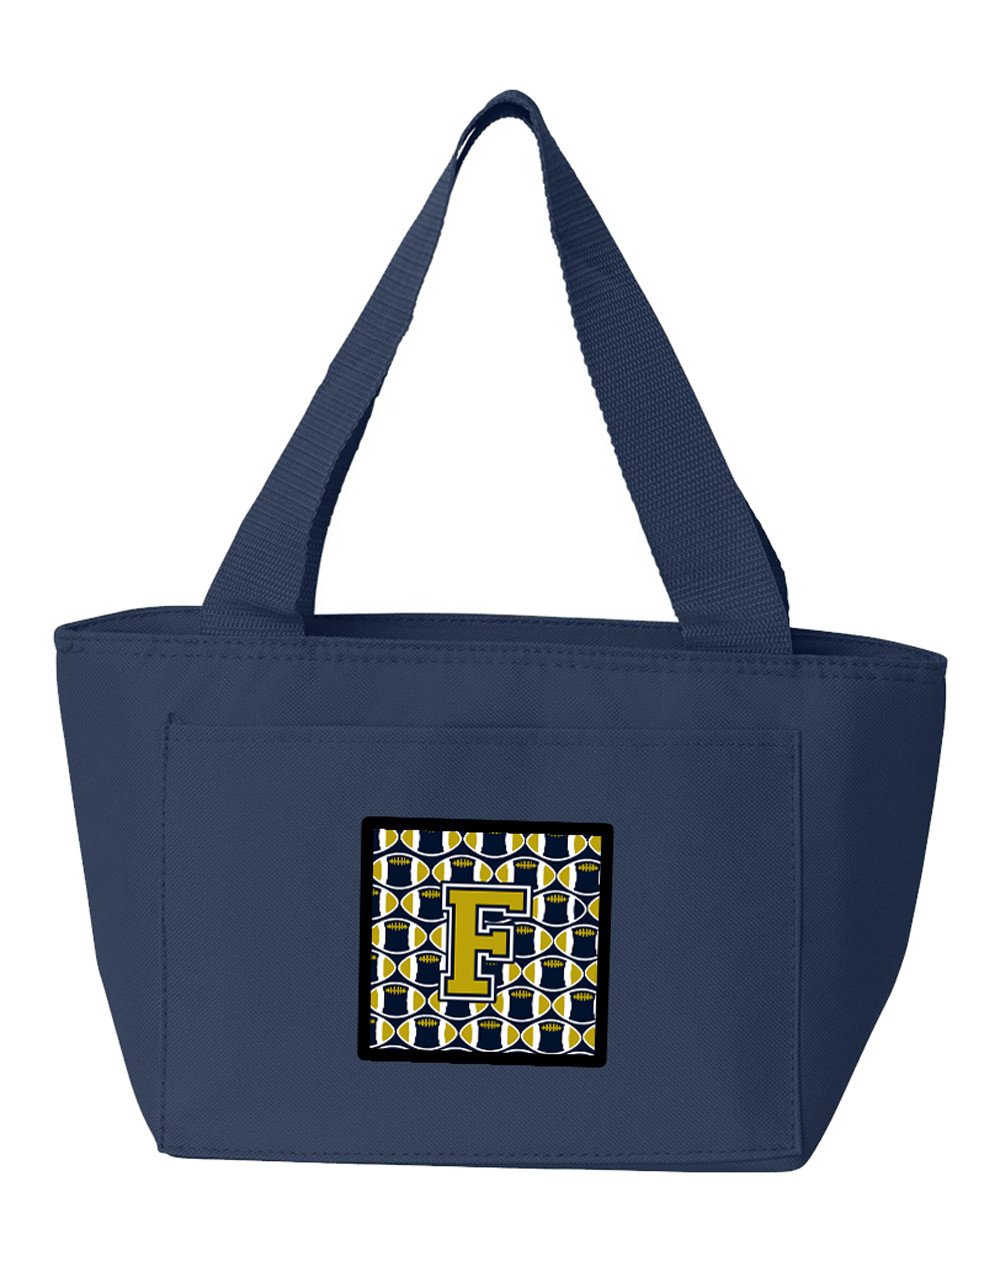 Letter F Football Blue and Gold Lunch Bag CJ1074-FNA-8808 by Caroline's Treasures